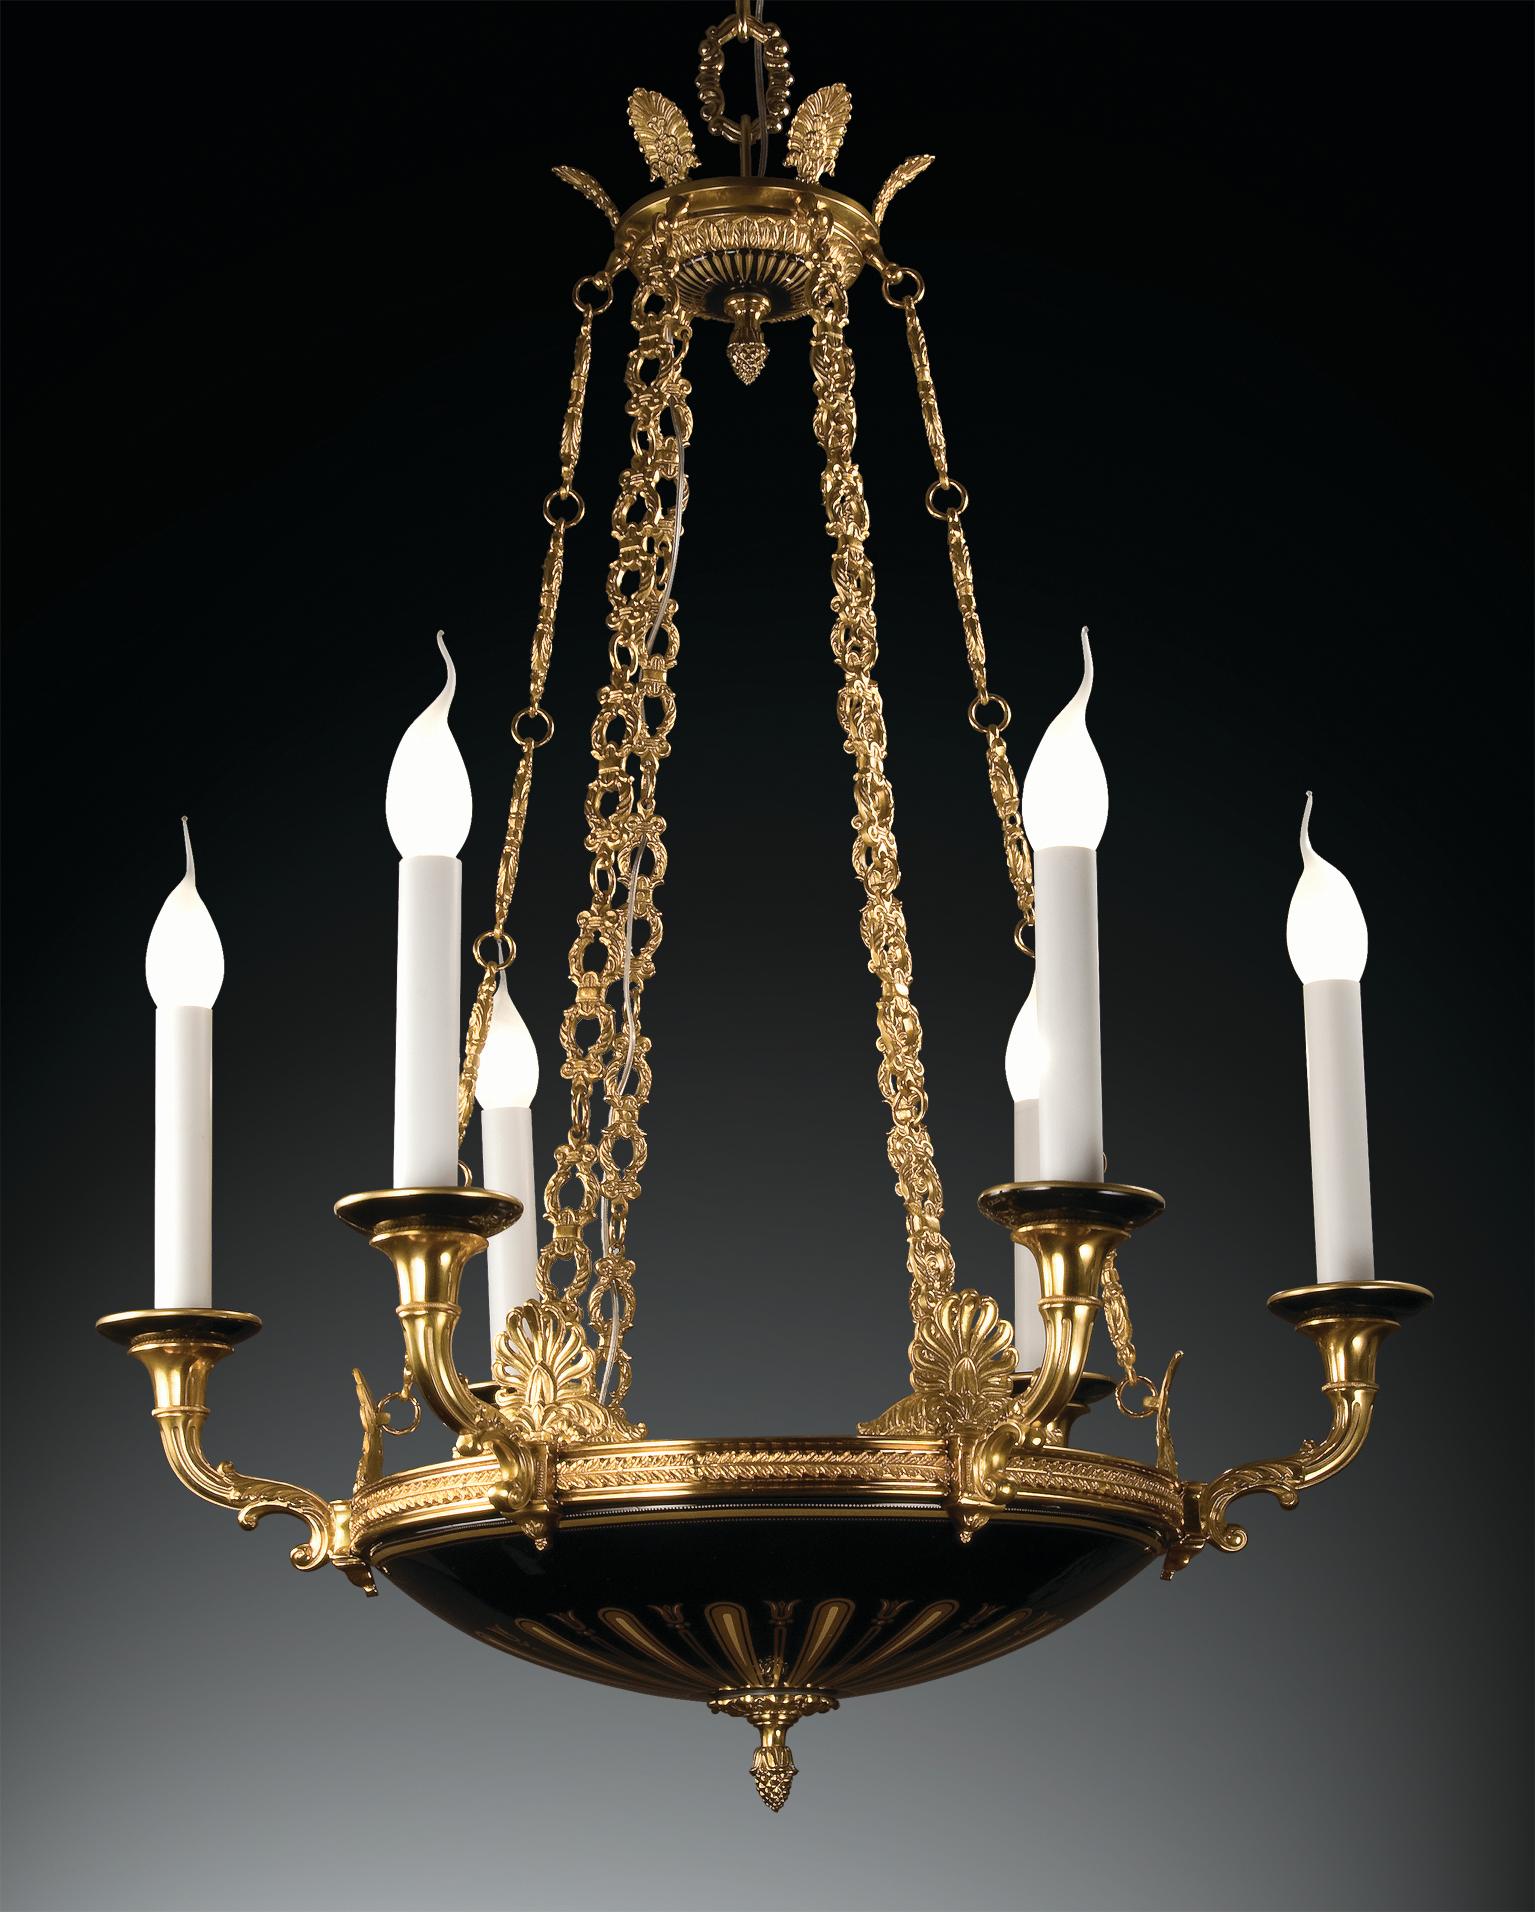 6-lights chandelier in decorated black porcelain and gold patinated bronze. 
The porcelain is decorated in pure gold. Each object is handcrafted and the care for every detail makes each item unique in its kind. The style of this chandelier is a